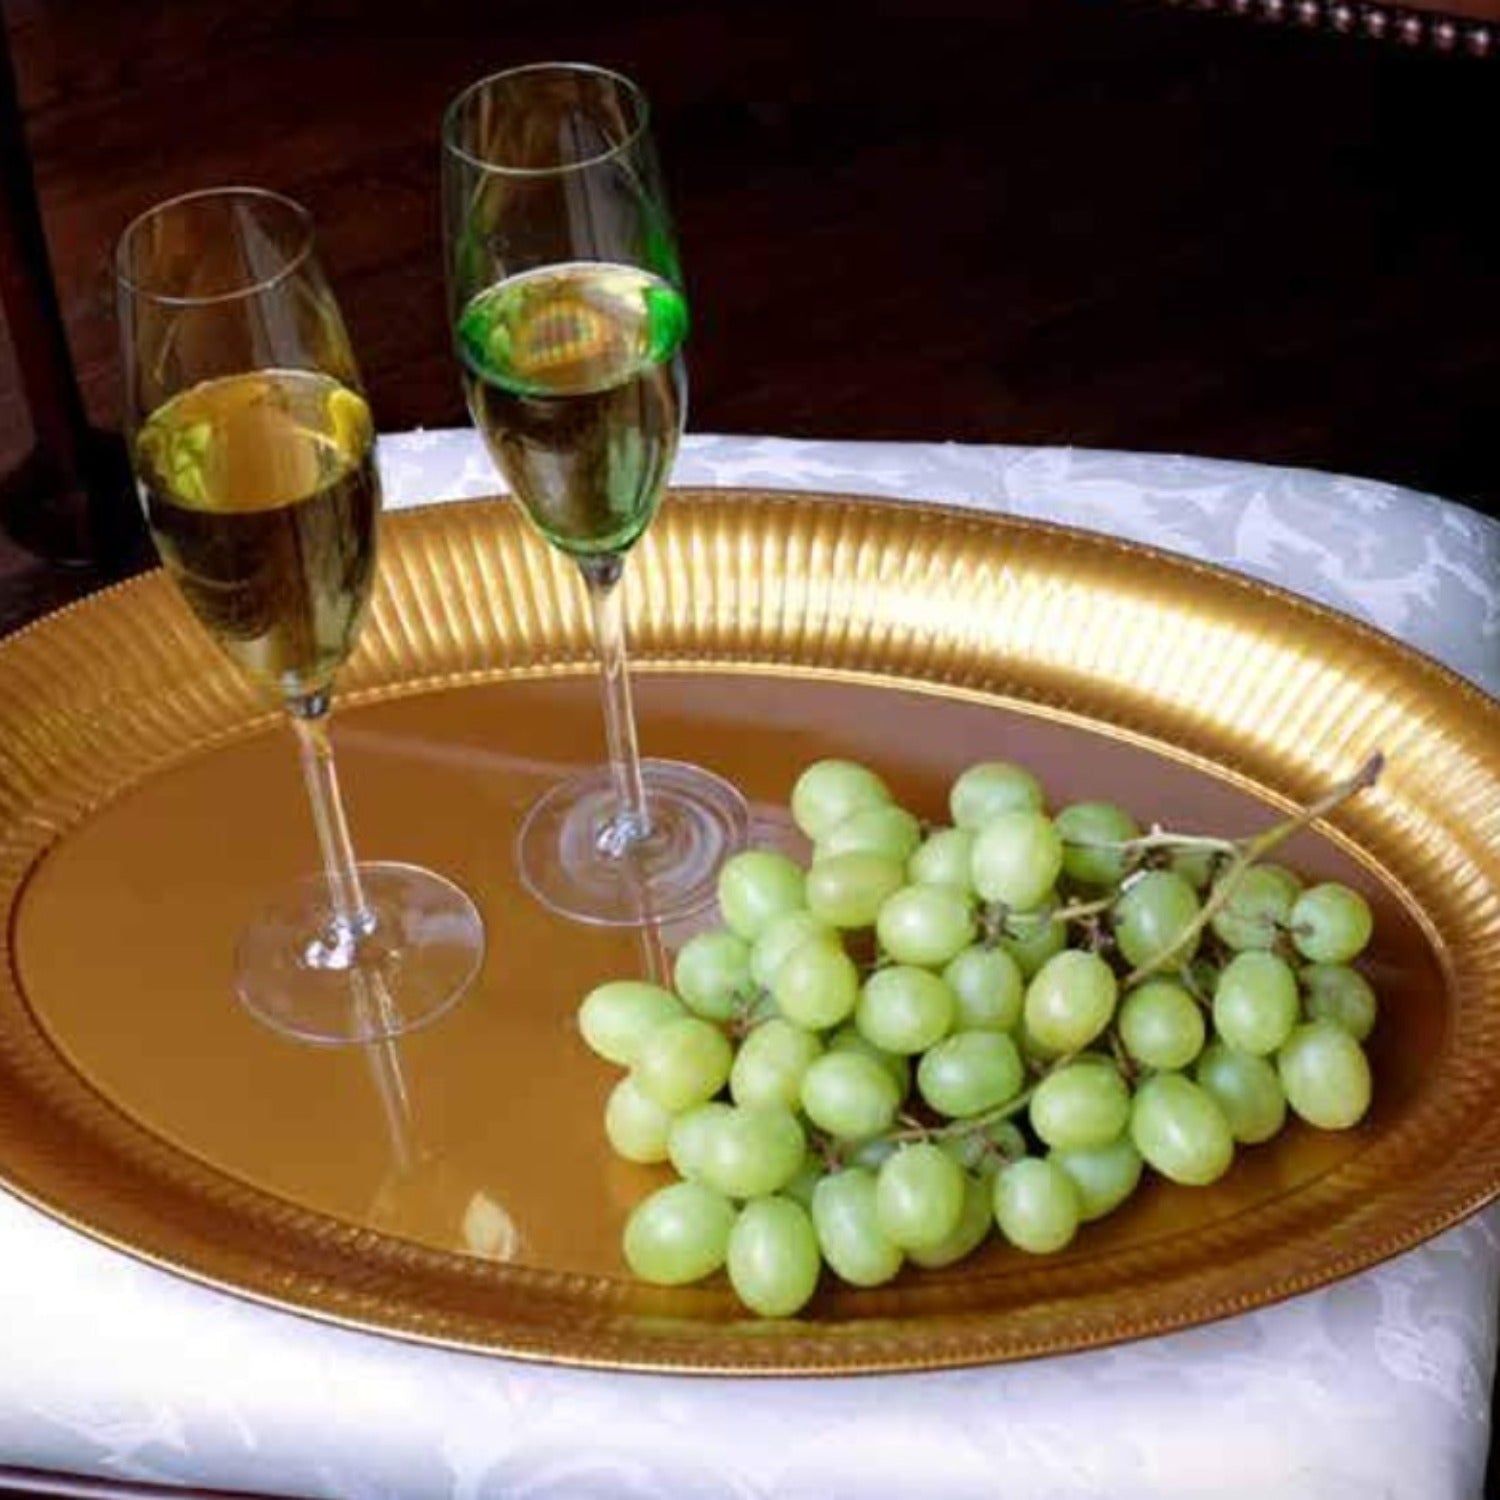 Gold Oval Plastic Tray 21'' X 14'' Serverware Party Dimensions   